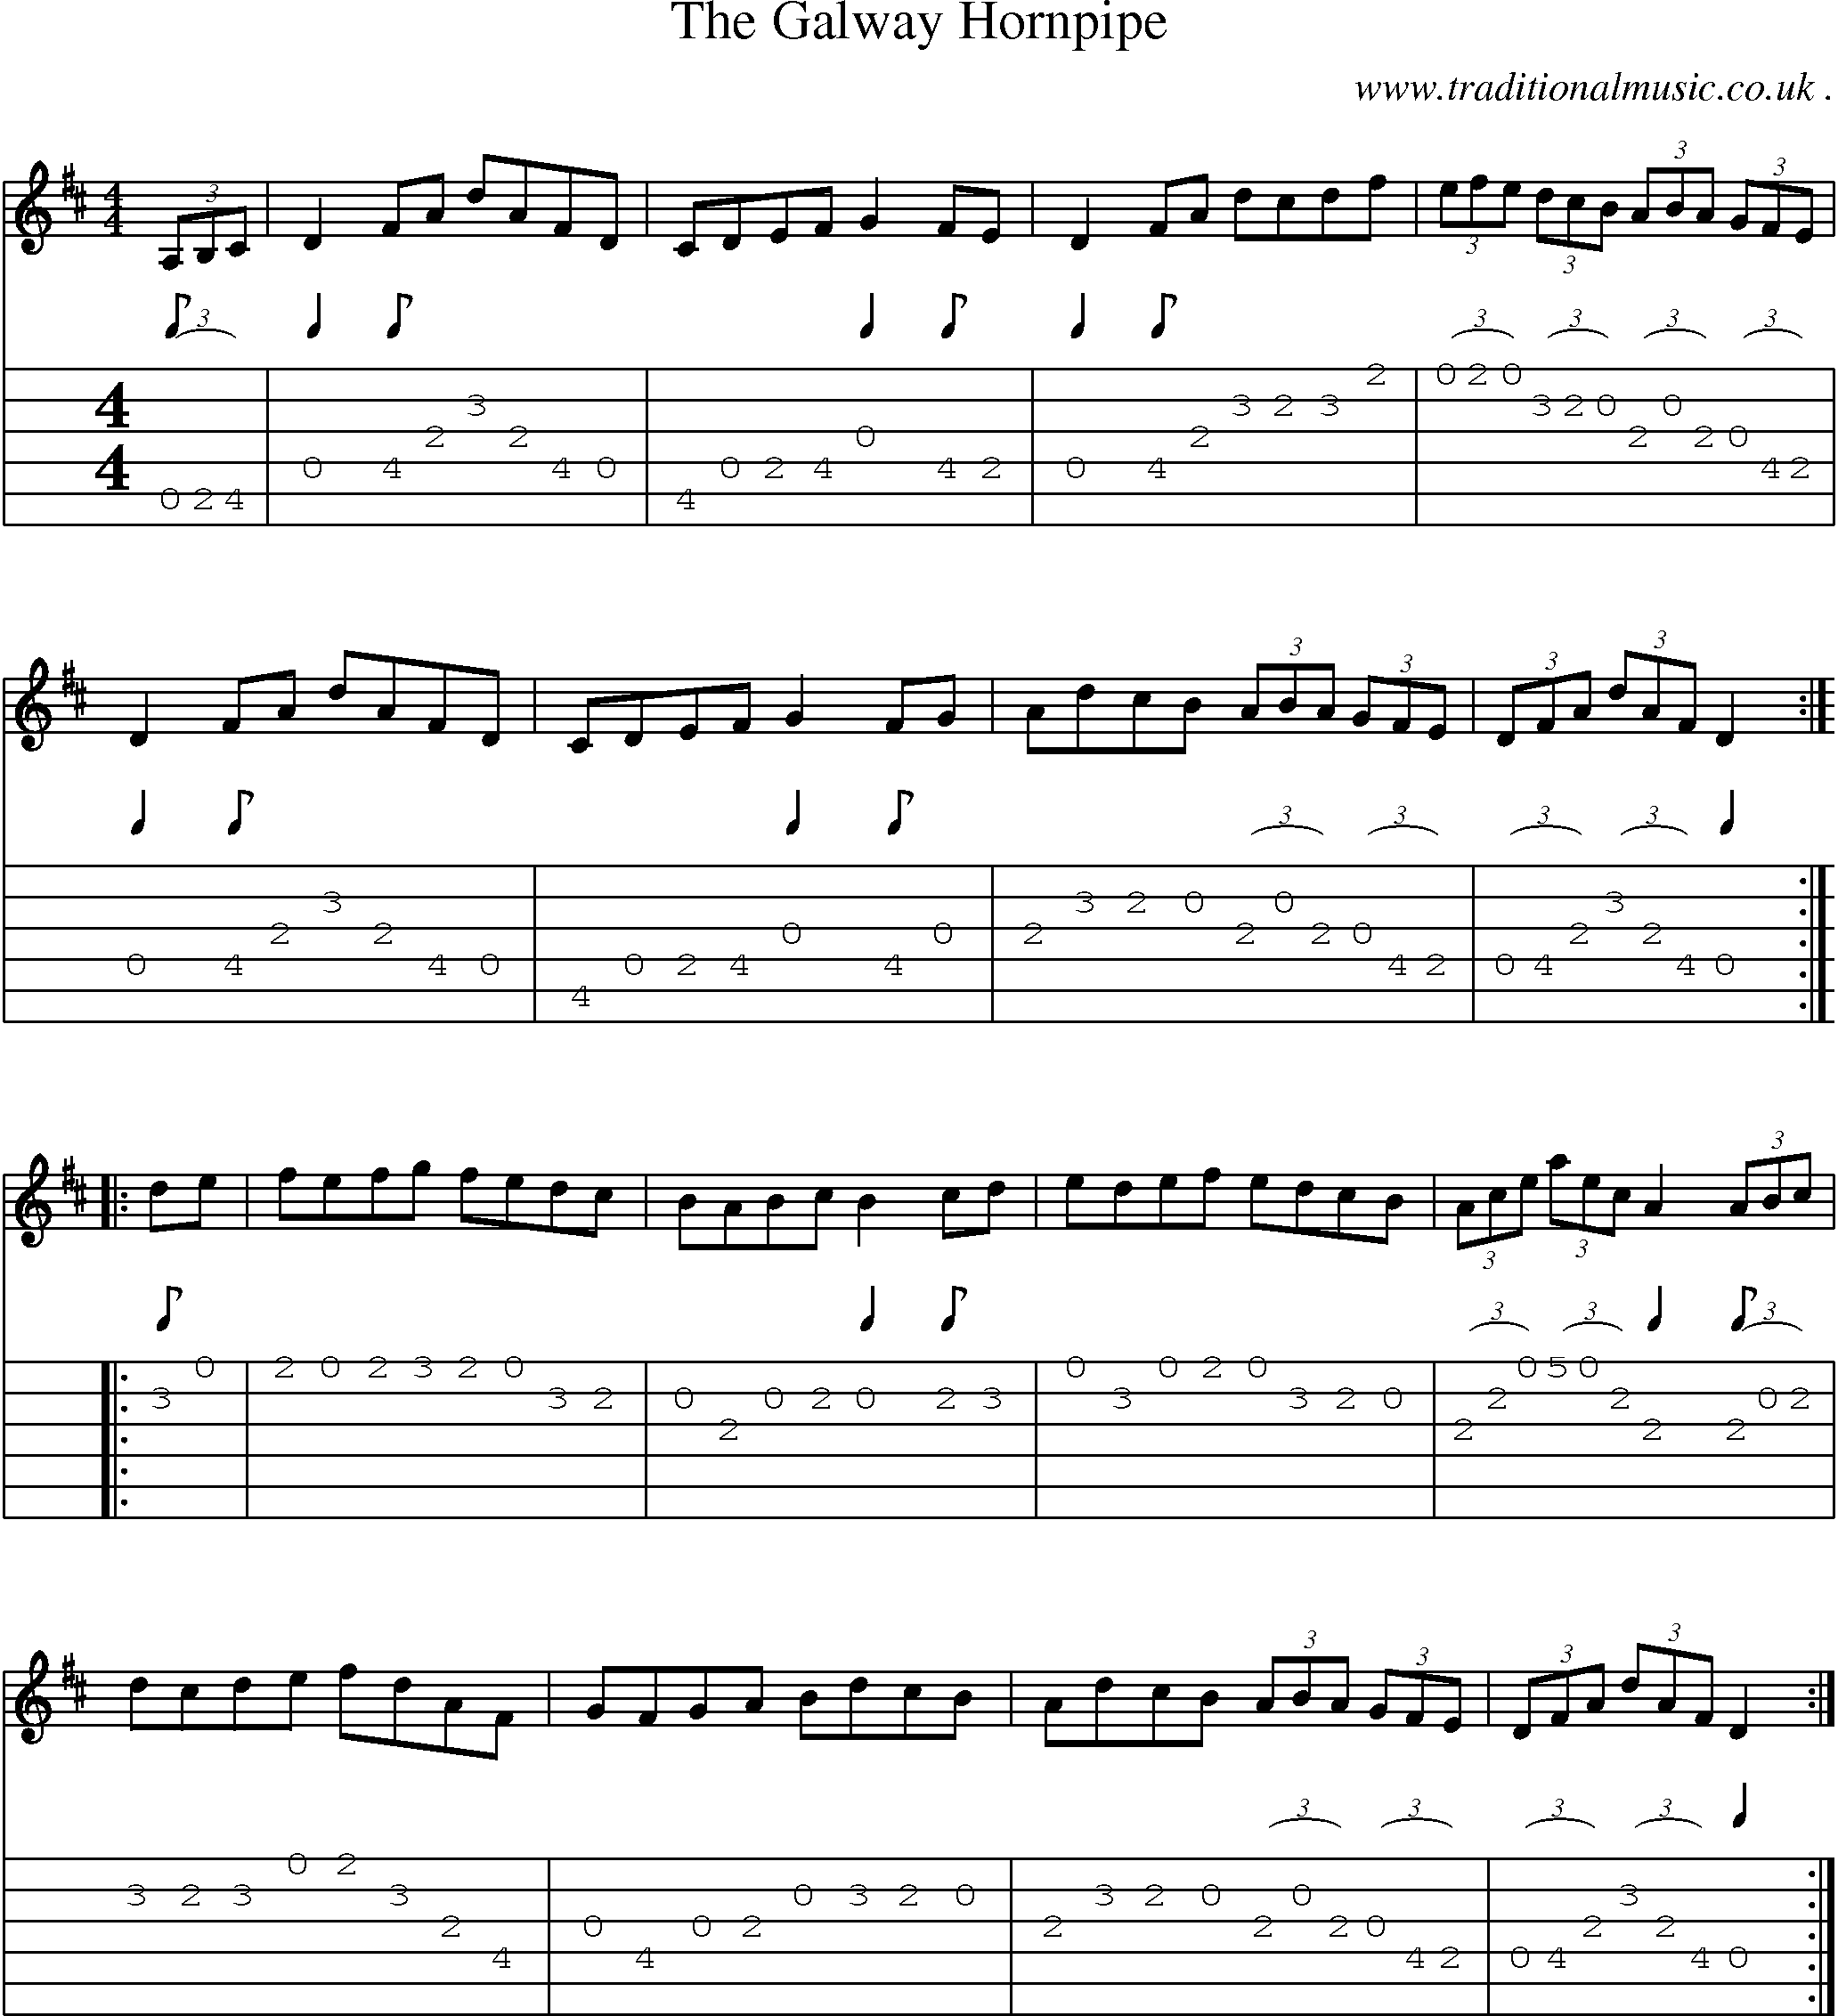 Sheet-Music and Guitar Tabs for The Galway Hornpipe